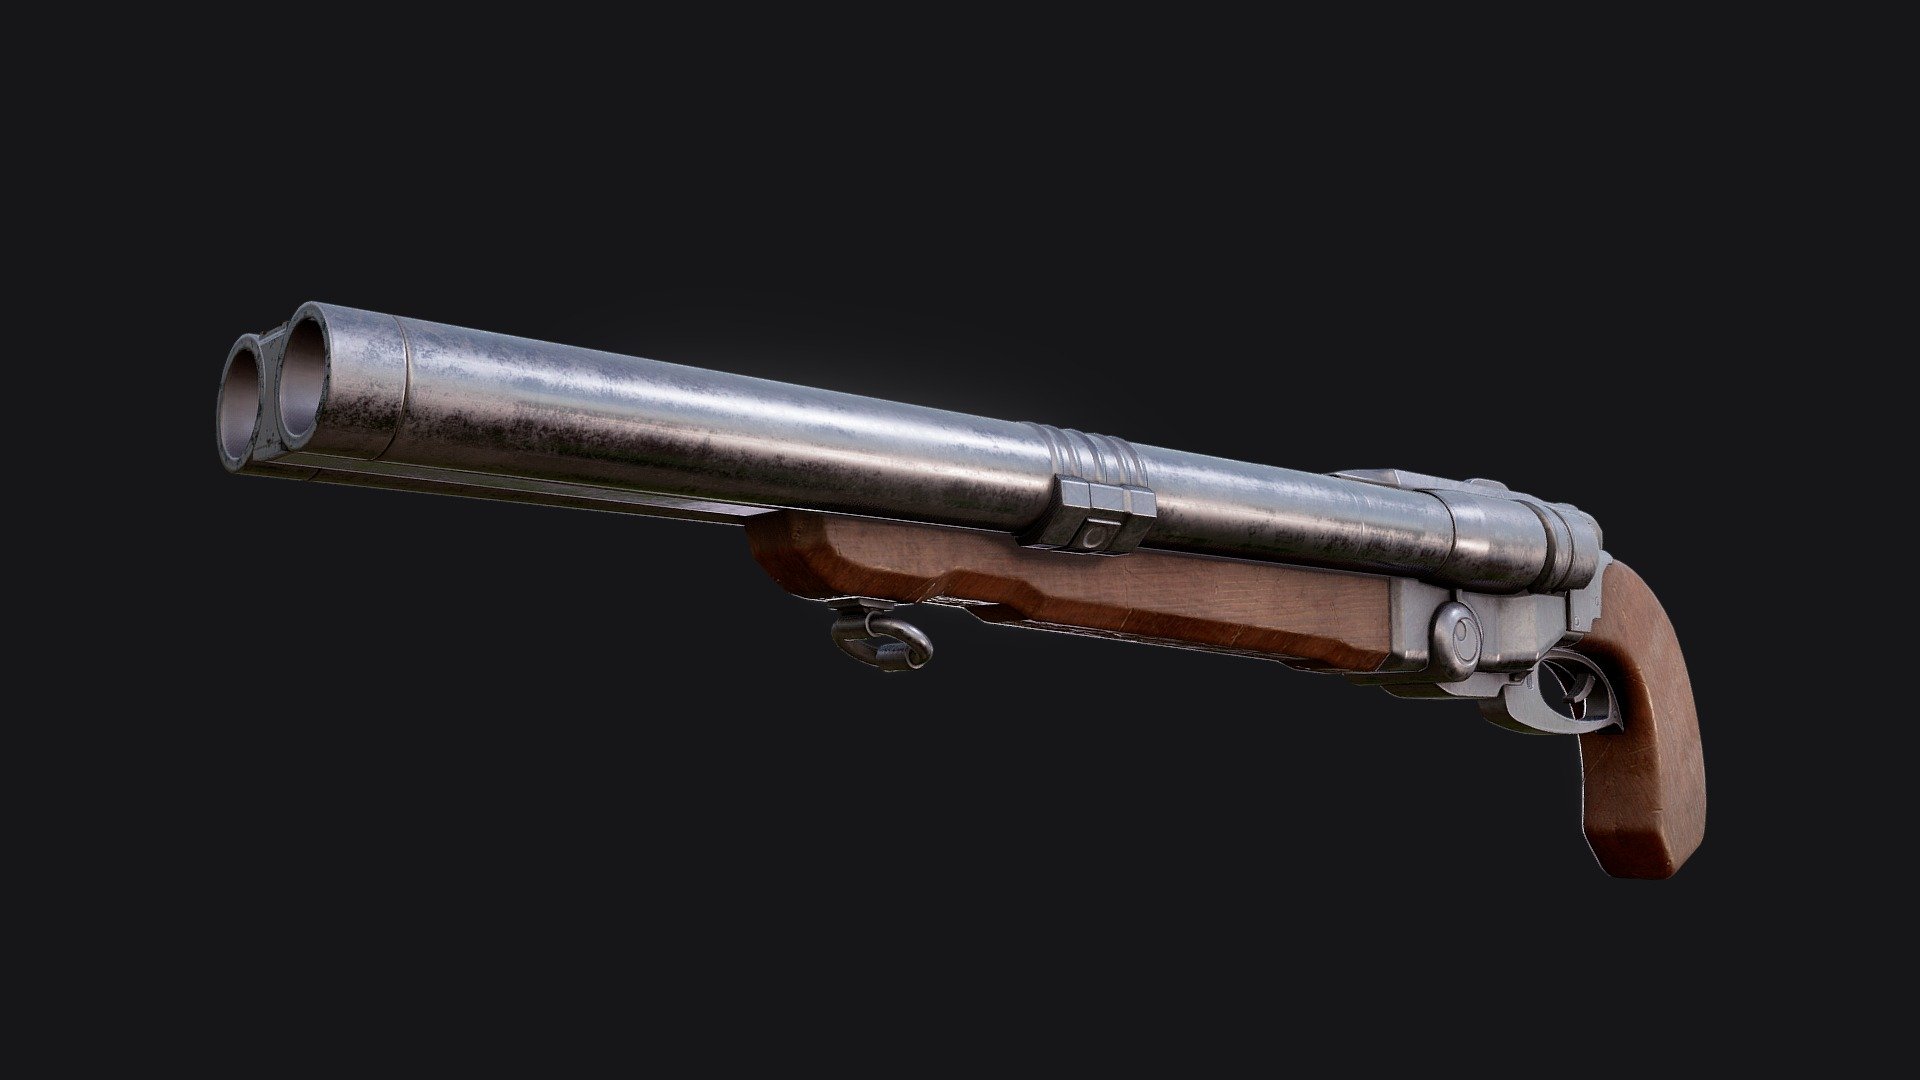 Recreation of the Super Shotgun from DOOM 2016. Done as a fan art and created for the Game Asset Pipline course exam at DIgital Arts and Entertainment. Hope you like it!

The concept is from offical DOOM concept art book &ldquo;The Art of DOOM